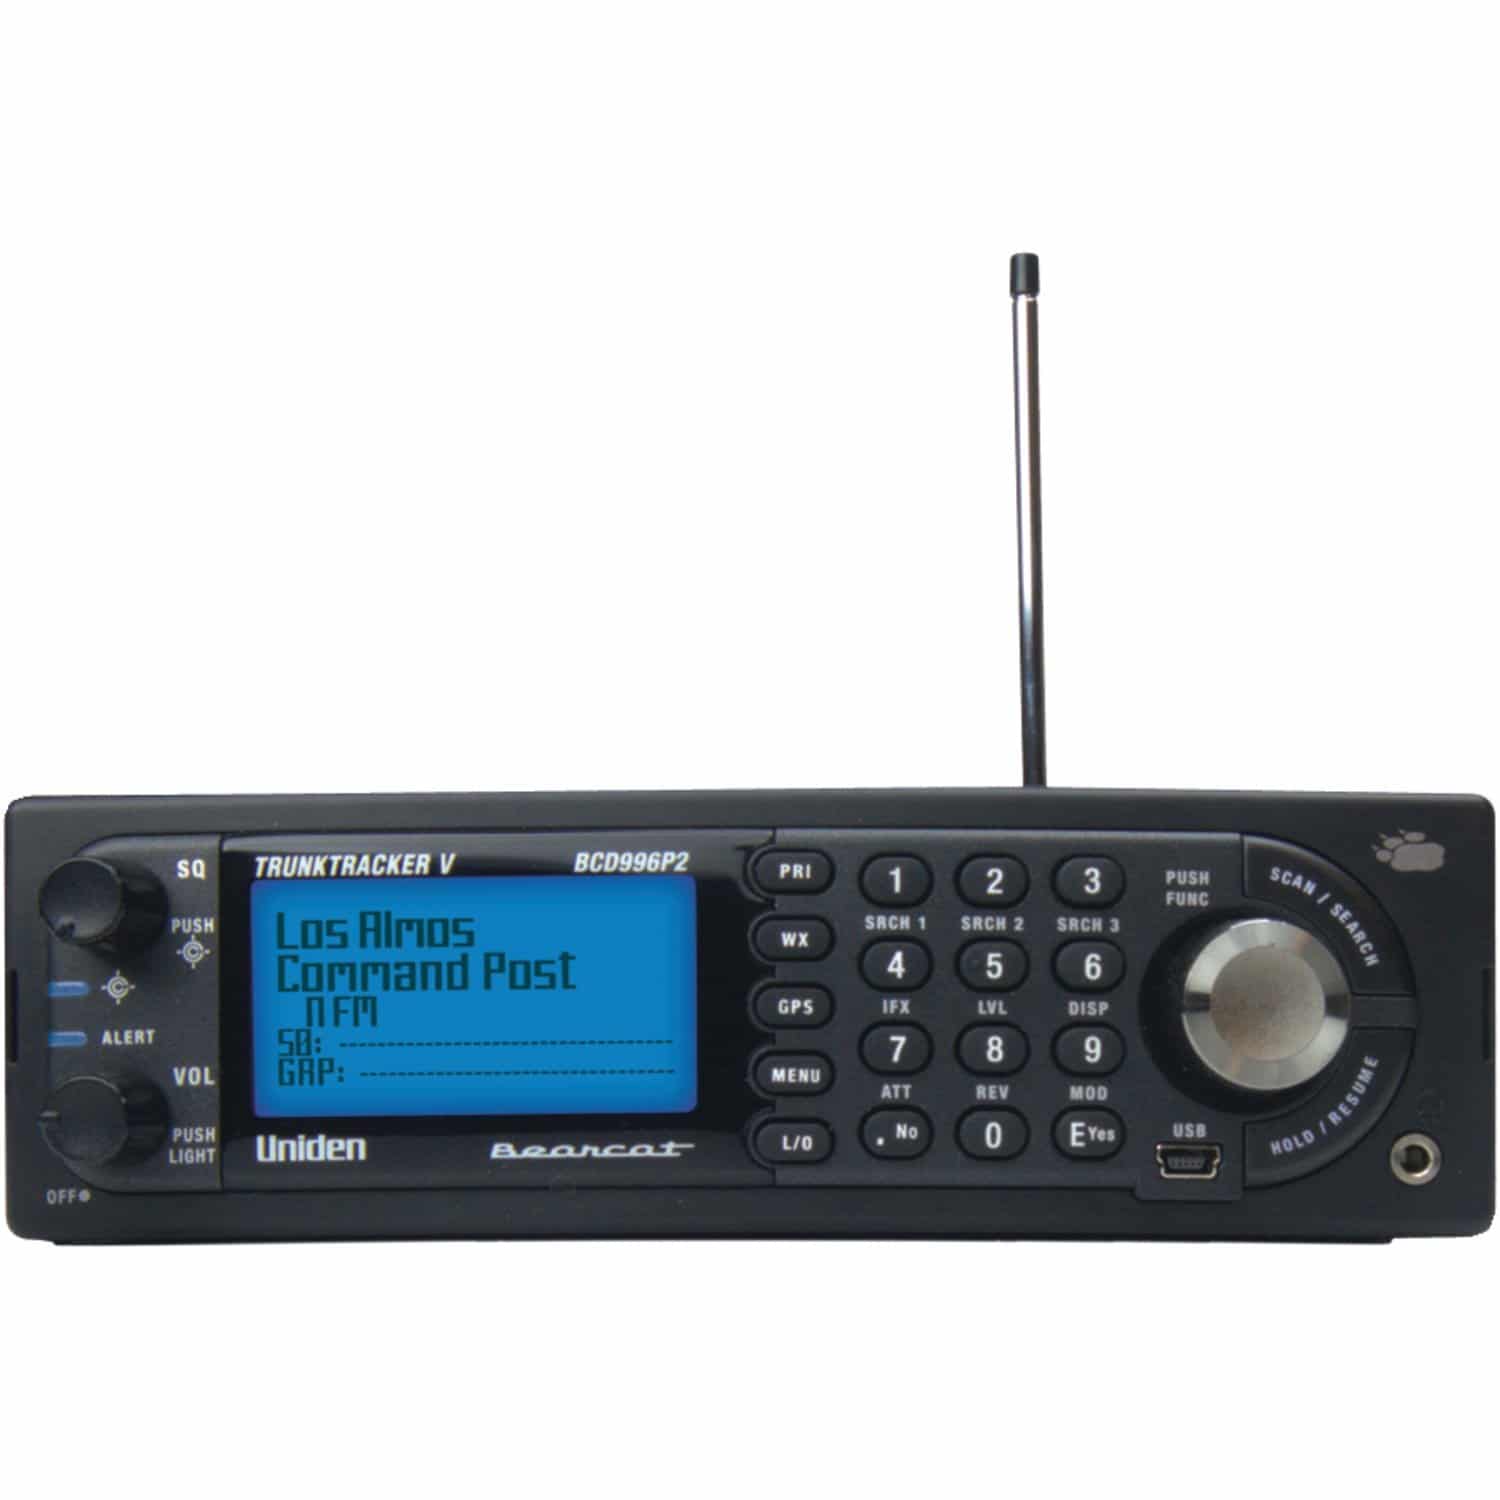 Uniden BCD996P2 Police Scanner Review 2020